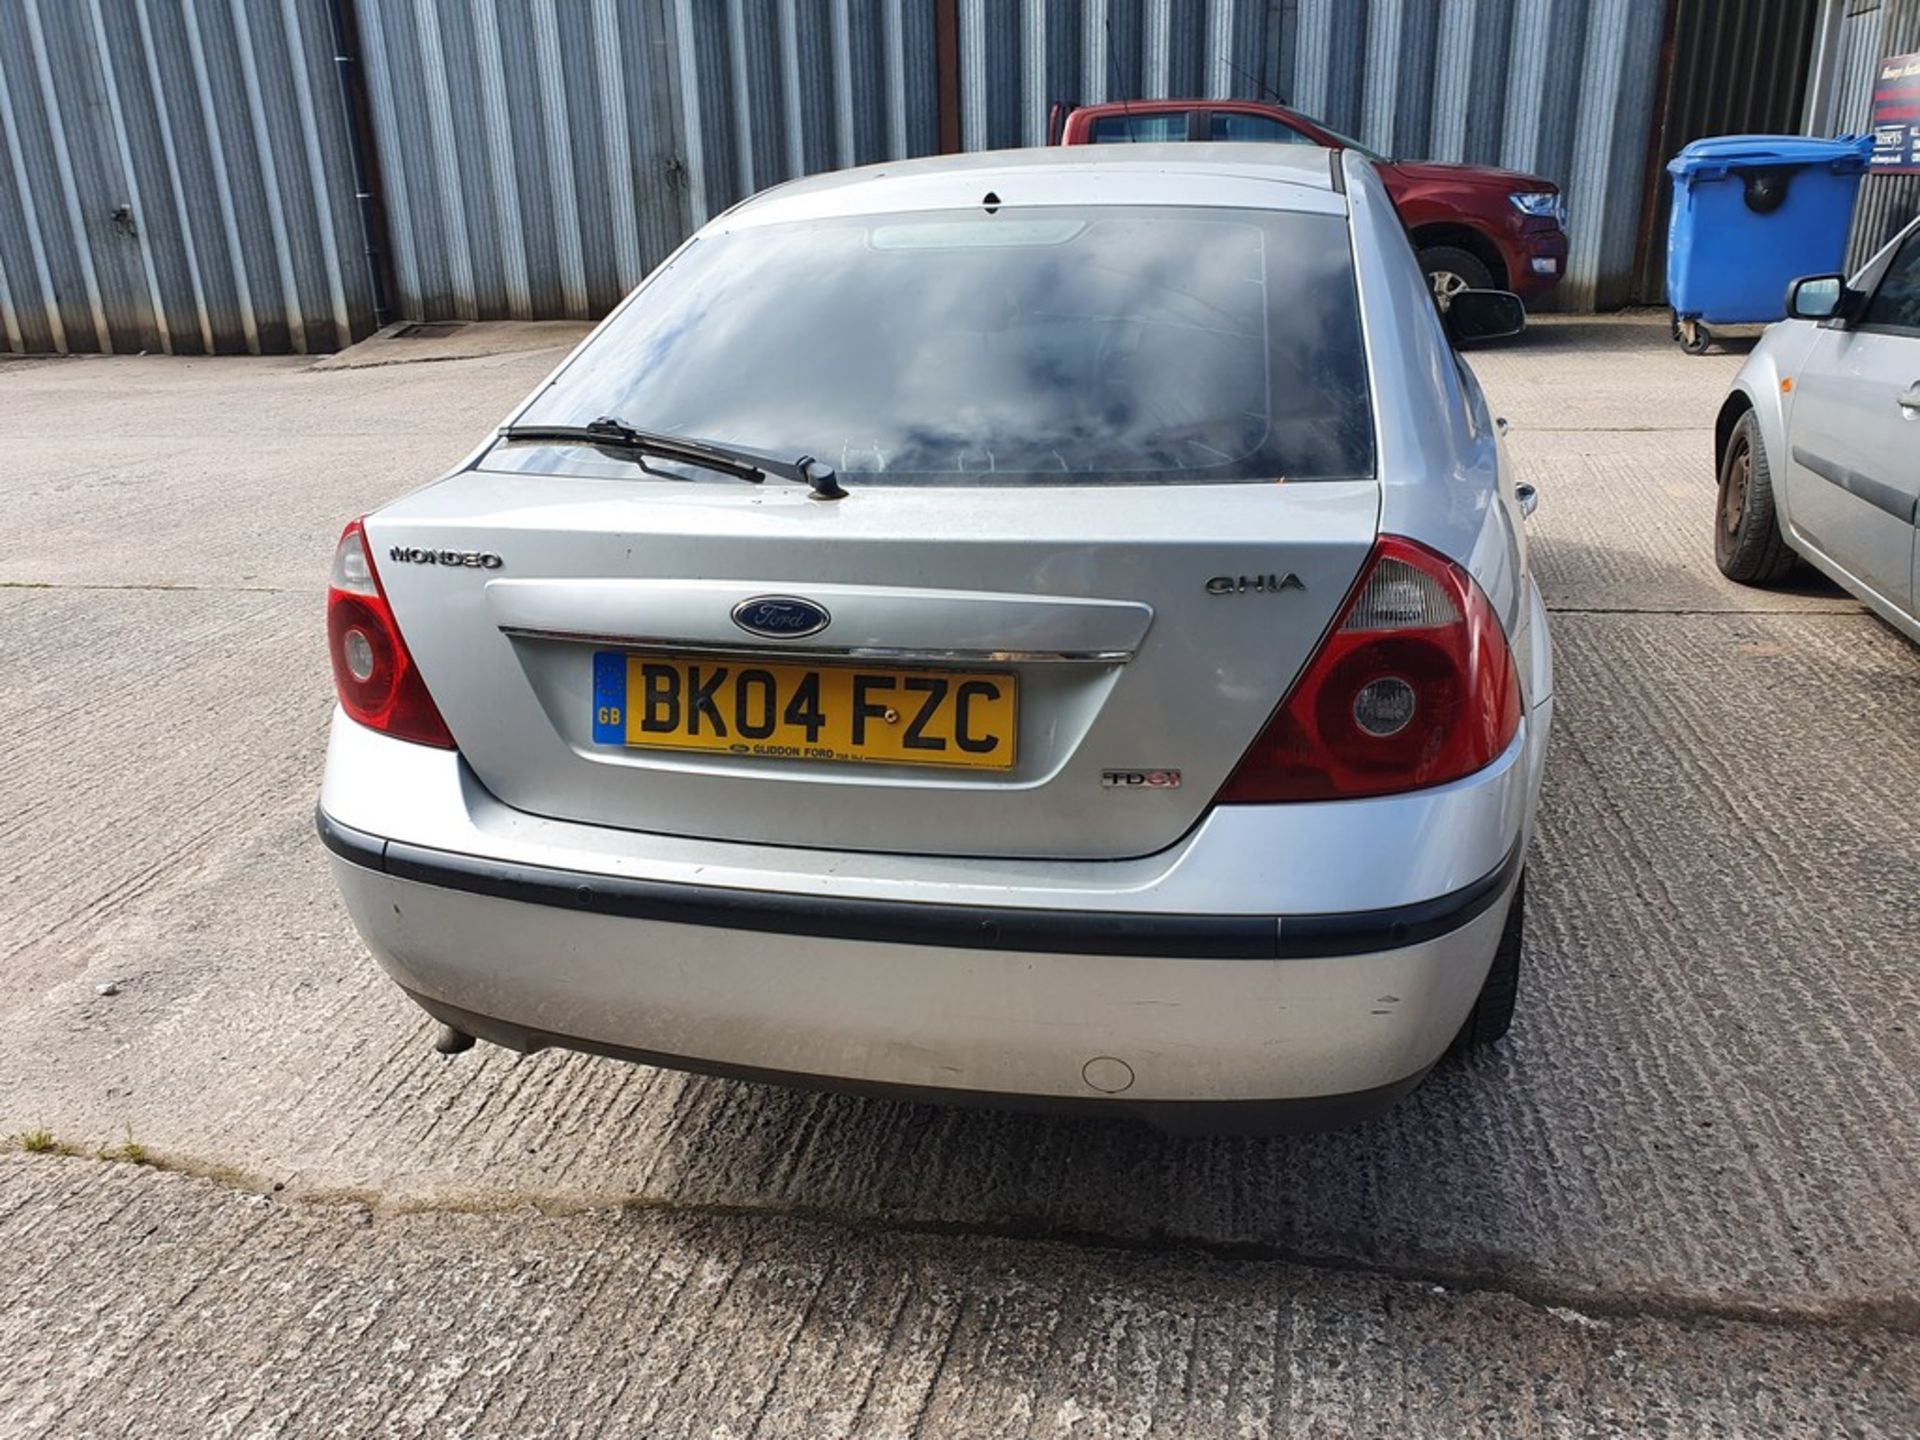 04/04 FORD MONDEO GHIA TDCI - 1998cc 5dr Hatchback (Silver, 190k) - Image 8 of 16